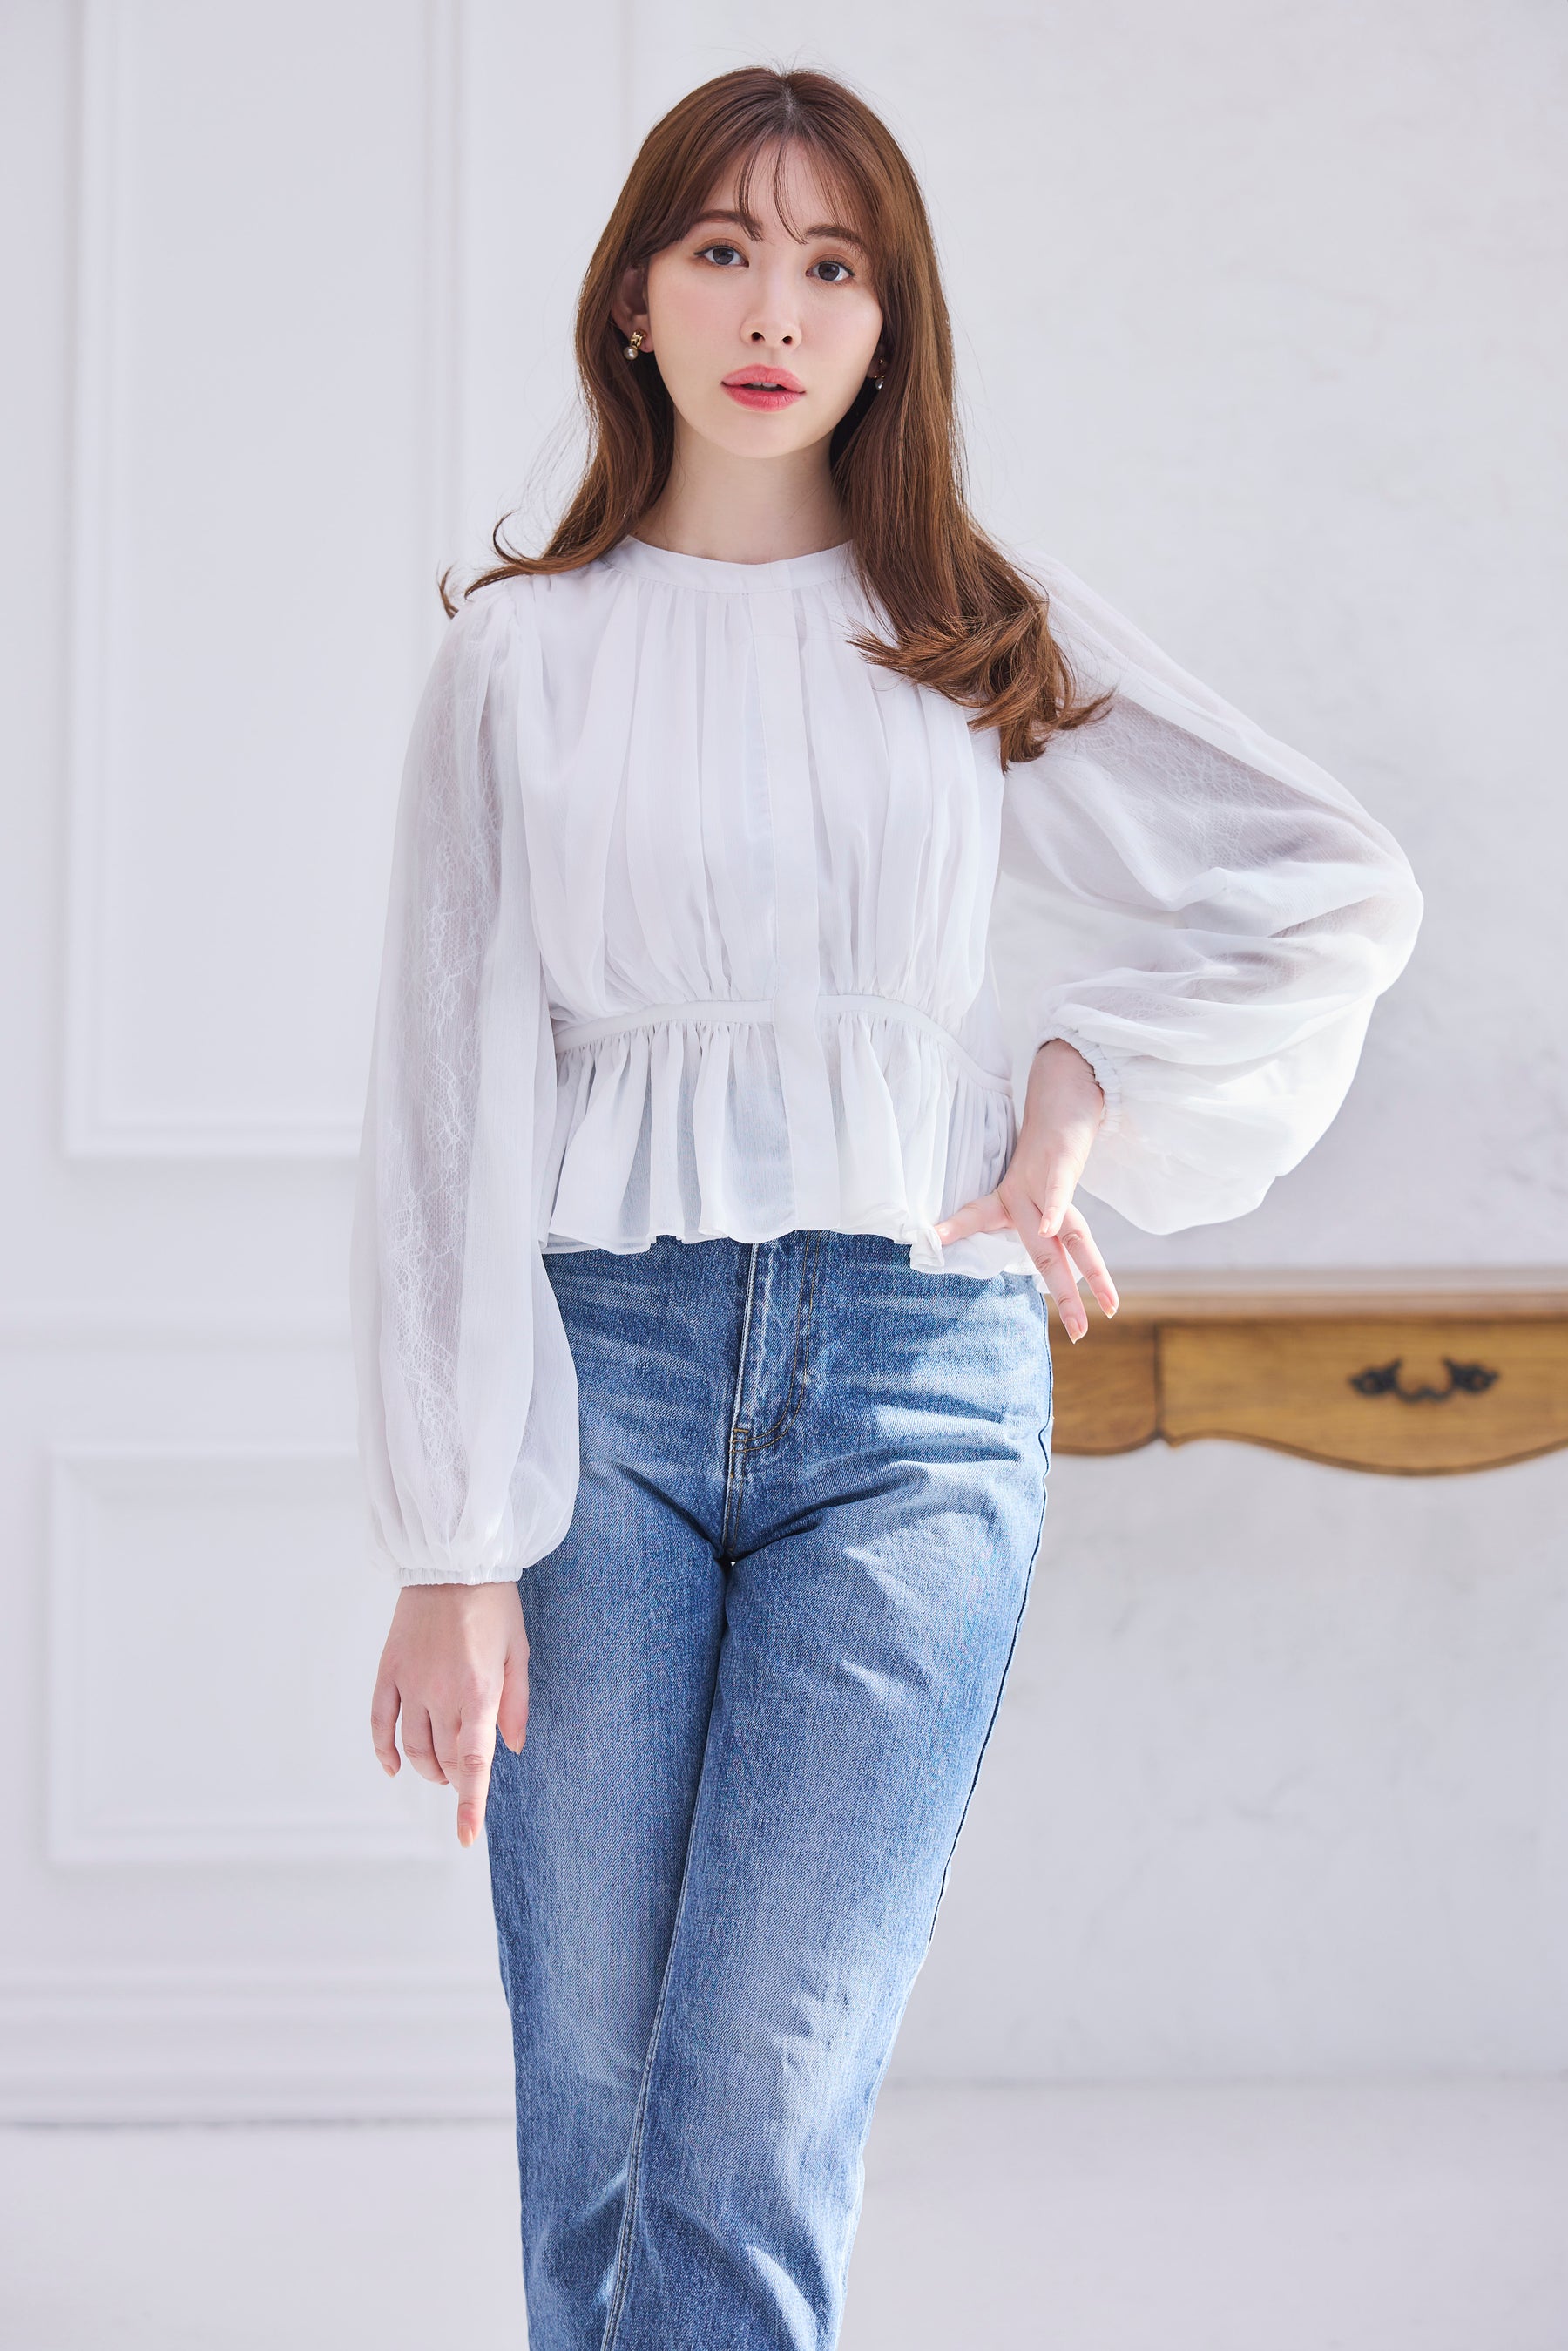 [Shipped in mid-March] Prospect Chiffon Blouse